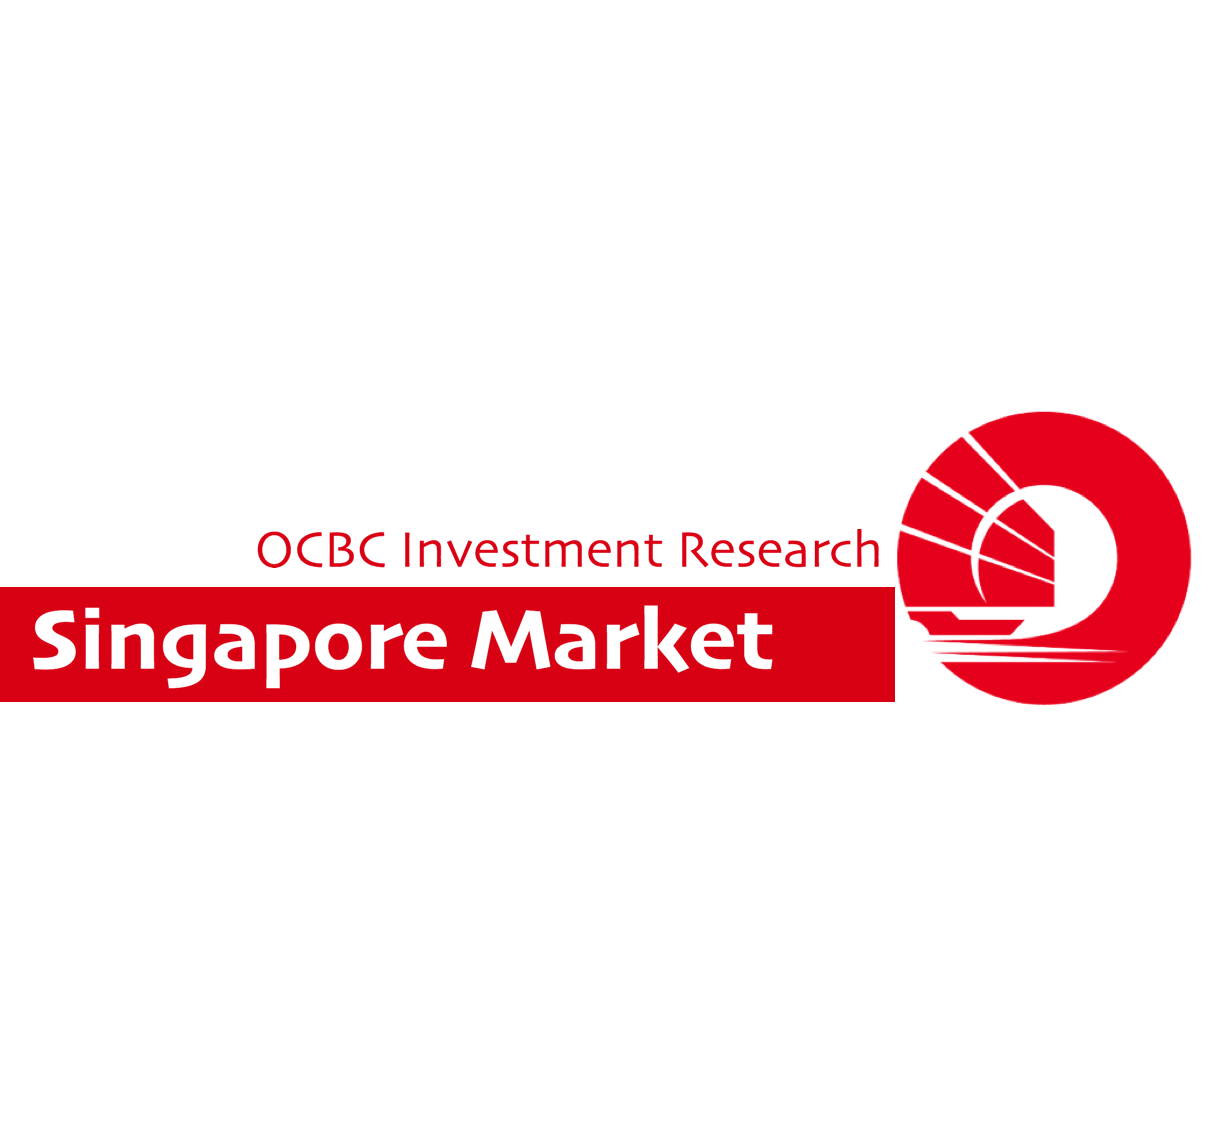 OIR: Keppel DC REIT, China Overseas Land and Investment